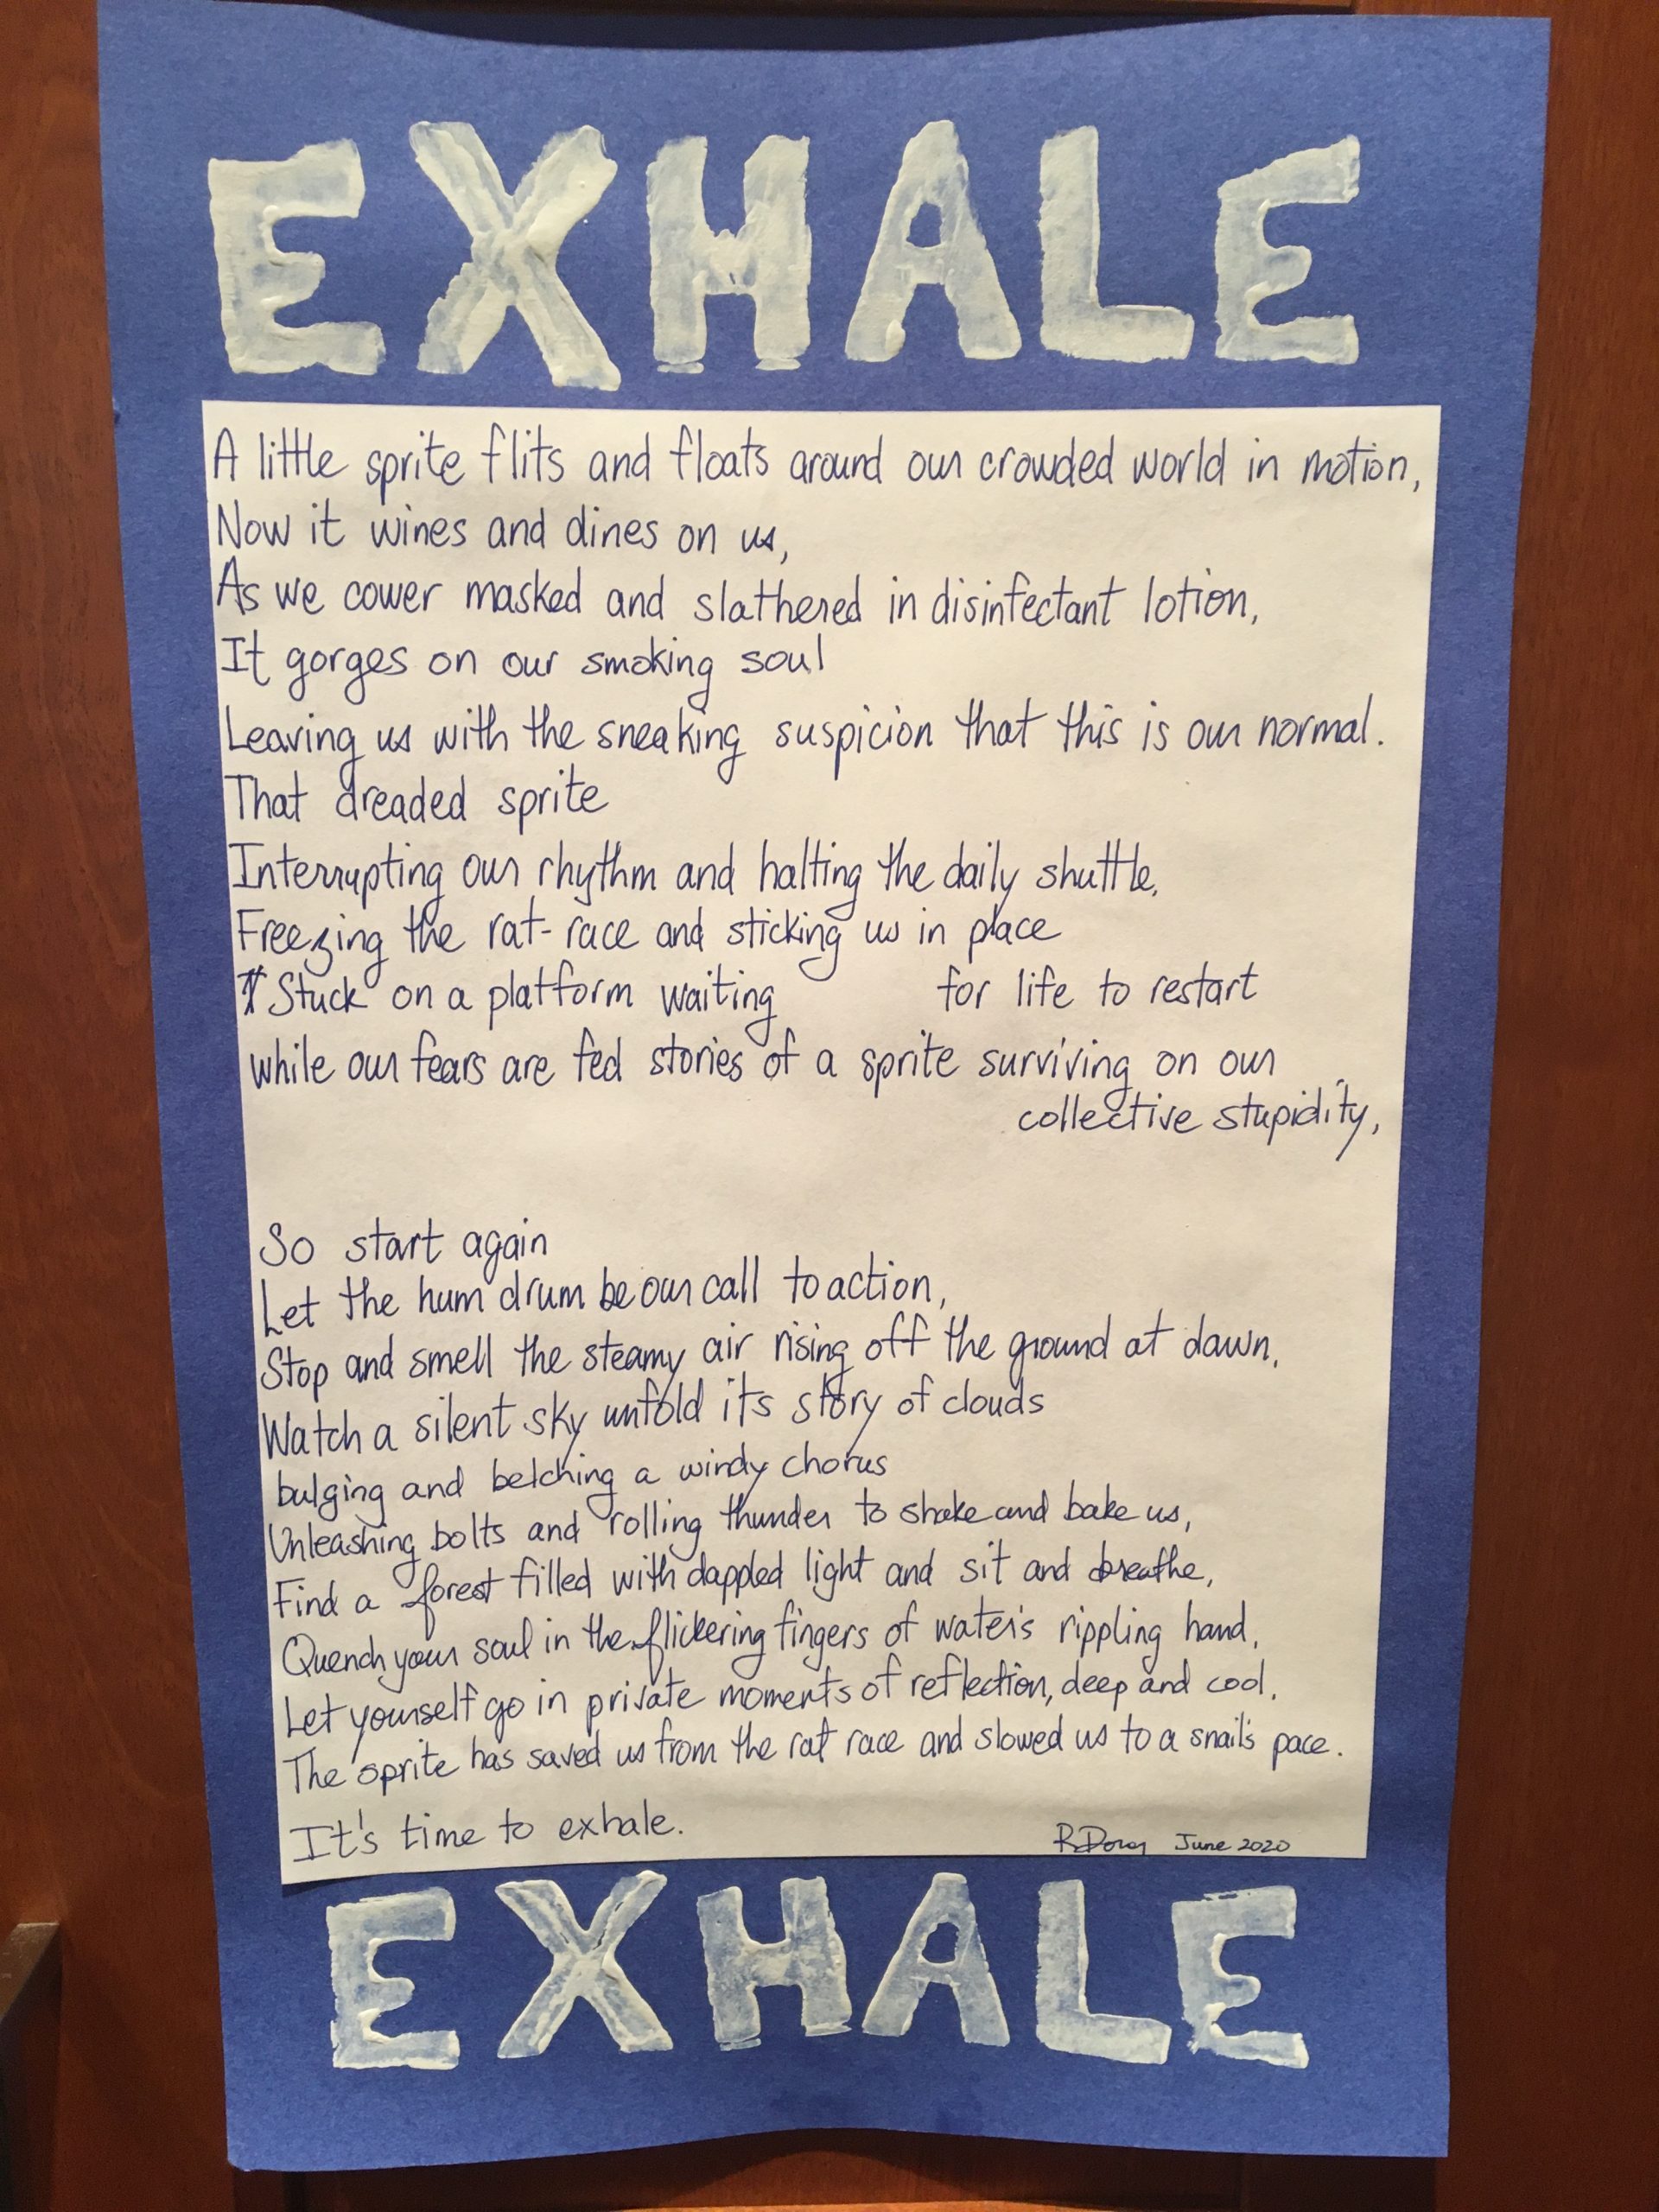 A poem called "Exhale"